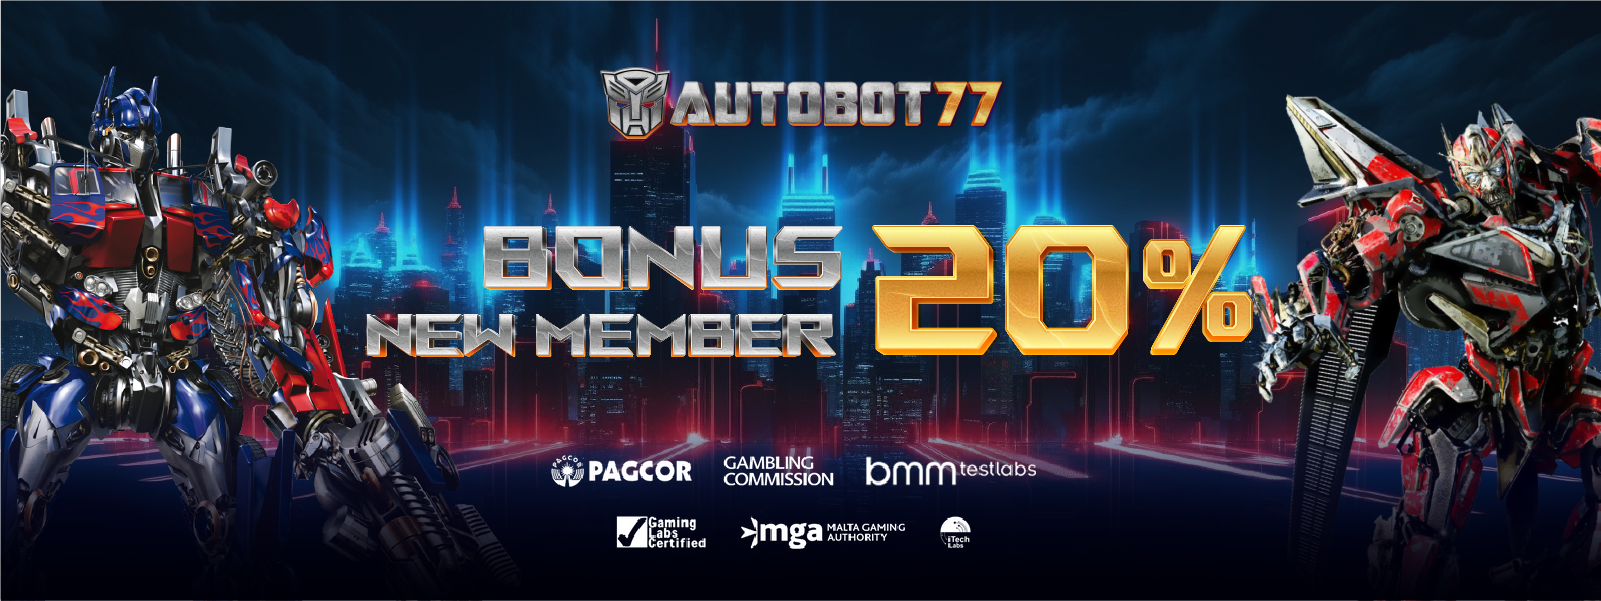 AUTOBOT77 virtual games which was founded in 2020 Indonesia